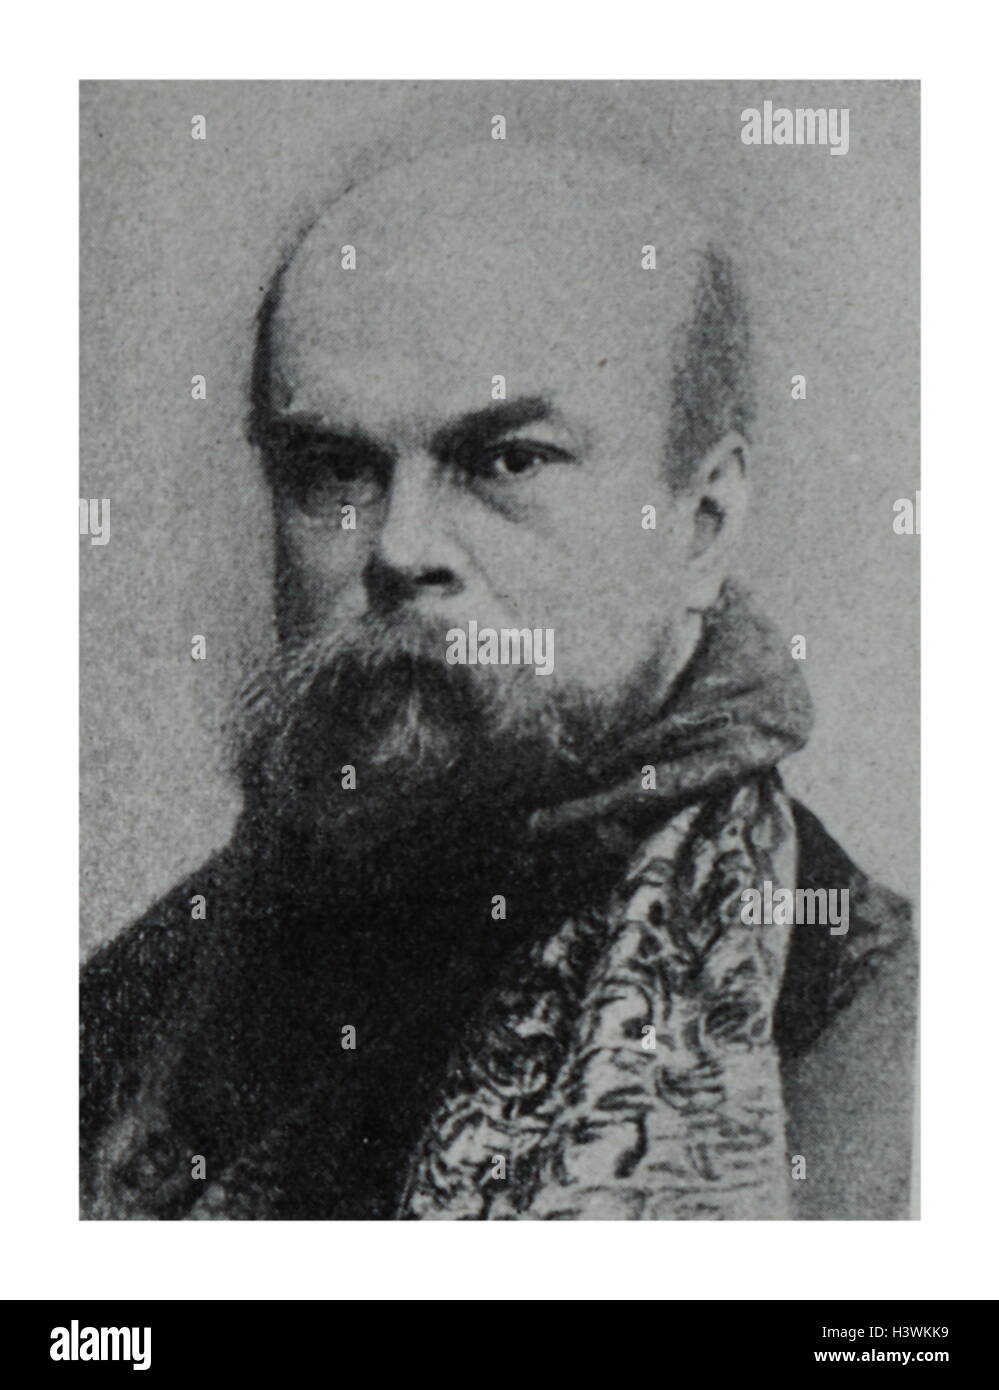 Photographic portrait of Paul Verlaine (1844-1896) a French poet. Dated 19th Century Stock Photo